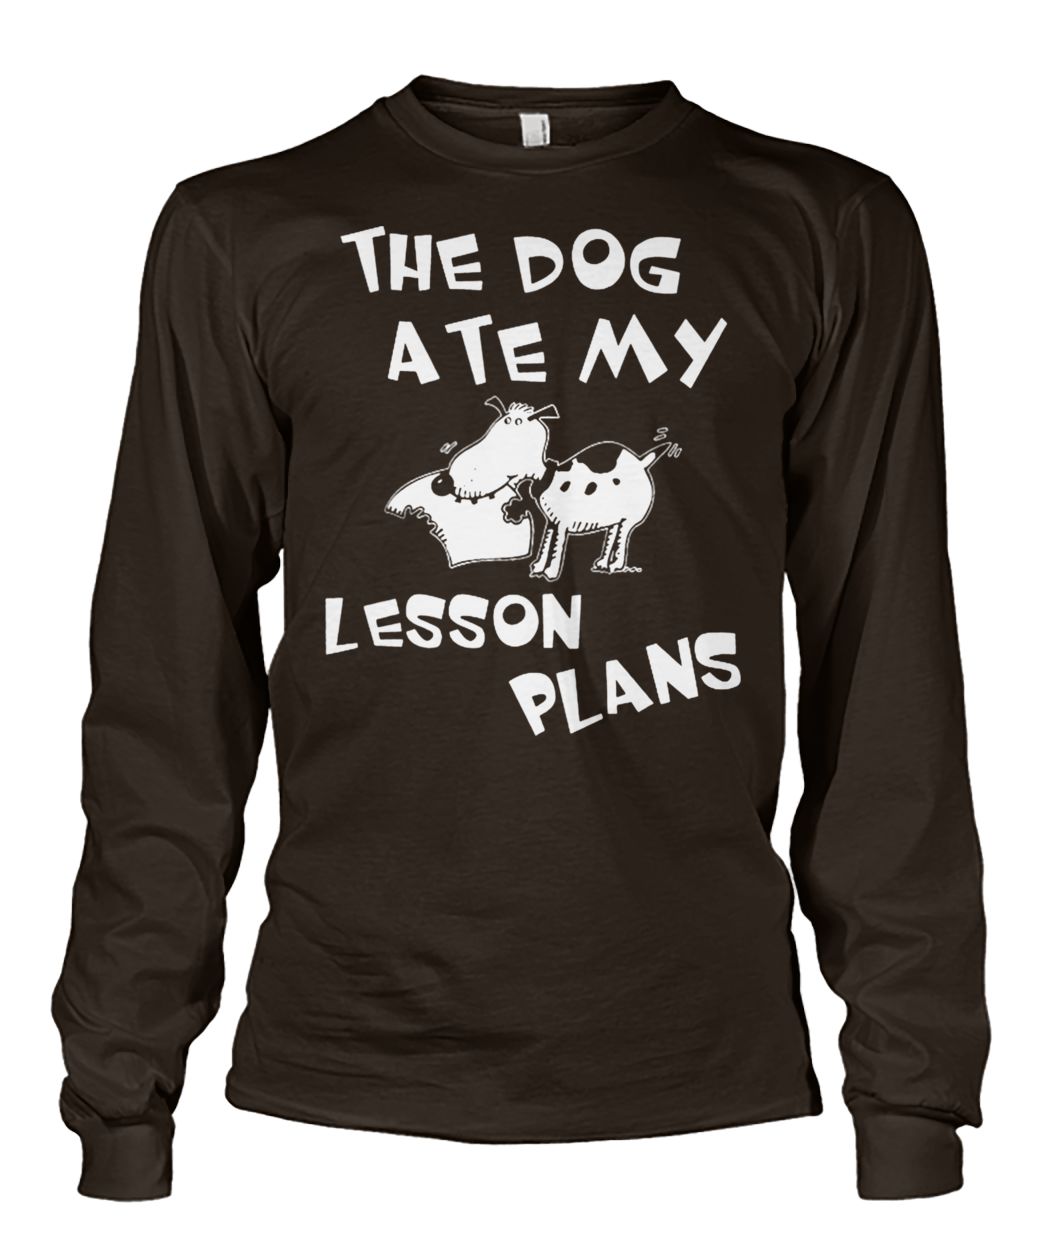 The dog ate my lesson plans unisex long sleeve